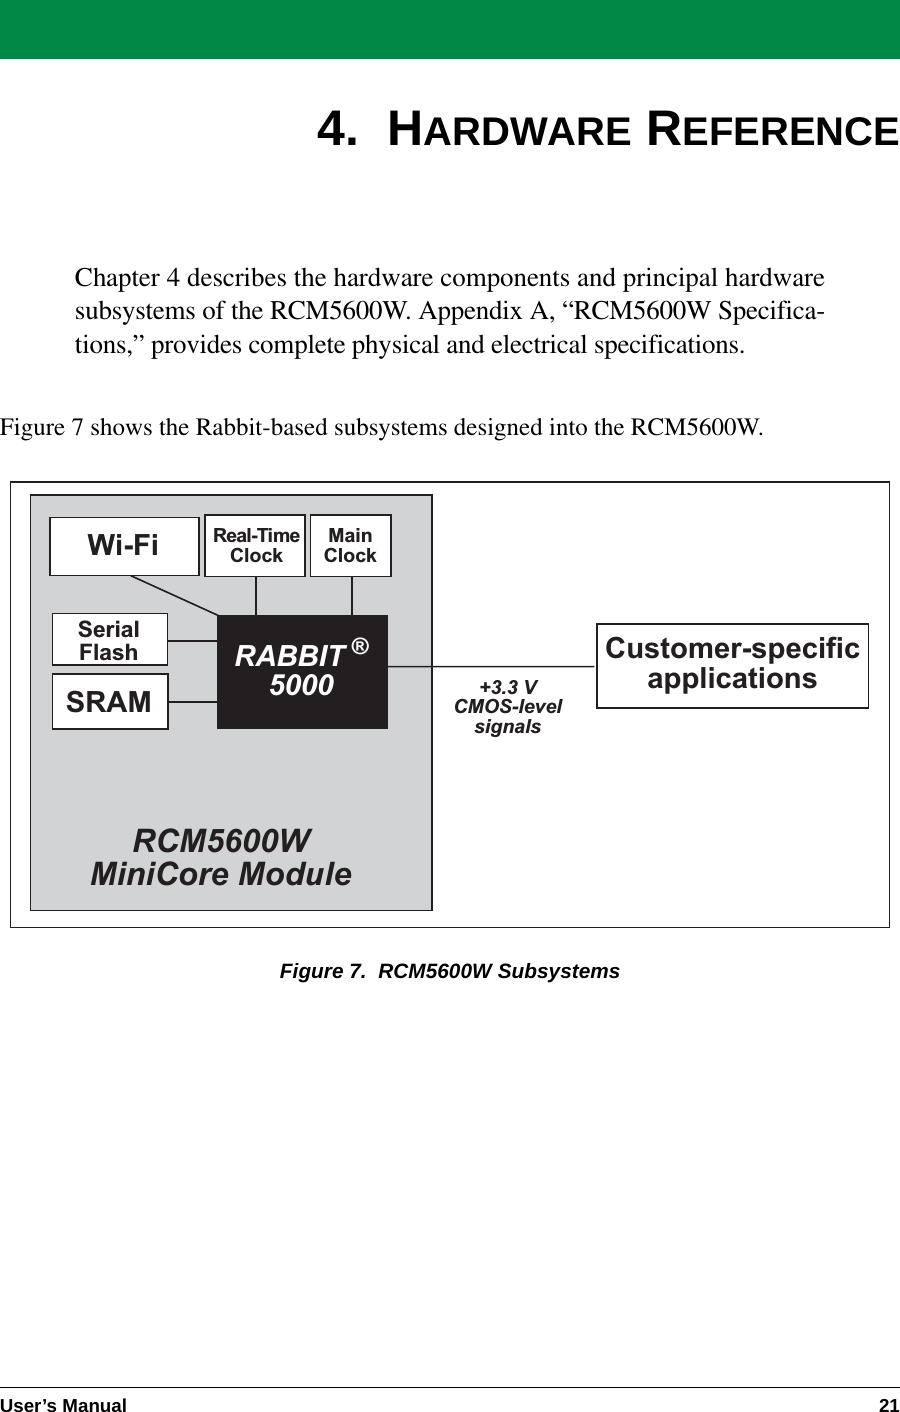 User’s Manual 214.  HARDWARE REFERENCEChapter 4 describes the hardware components and principal hardwaresubsystems of the RCM5600W. Appendix A, “RCM5600W Specifica-tions,” provides complete physical and electrical specifications.Figure 7 shows the Rabbit-based subsystems designed into the RCM5600W.Figure 7.  RCM5600W SubsystemsRCM5600WMiniCore ModuleRABBIT ®5000+3.3 VCMOS-levelsignalsCustomer-specificapplicationsReal-TimeClockMainClockSRAMSerialFlashWi-Fi